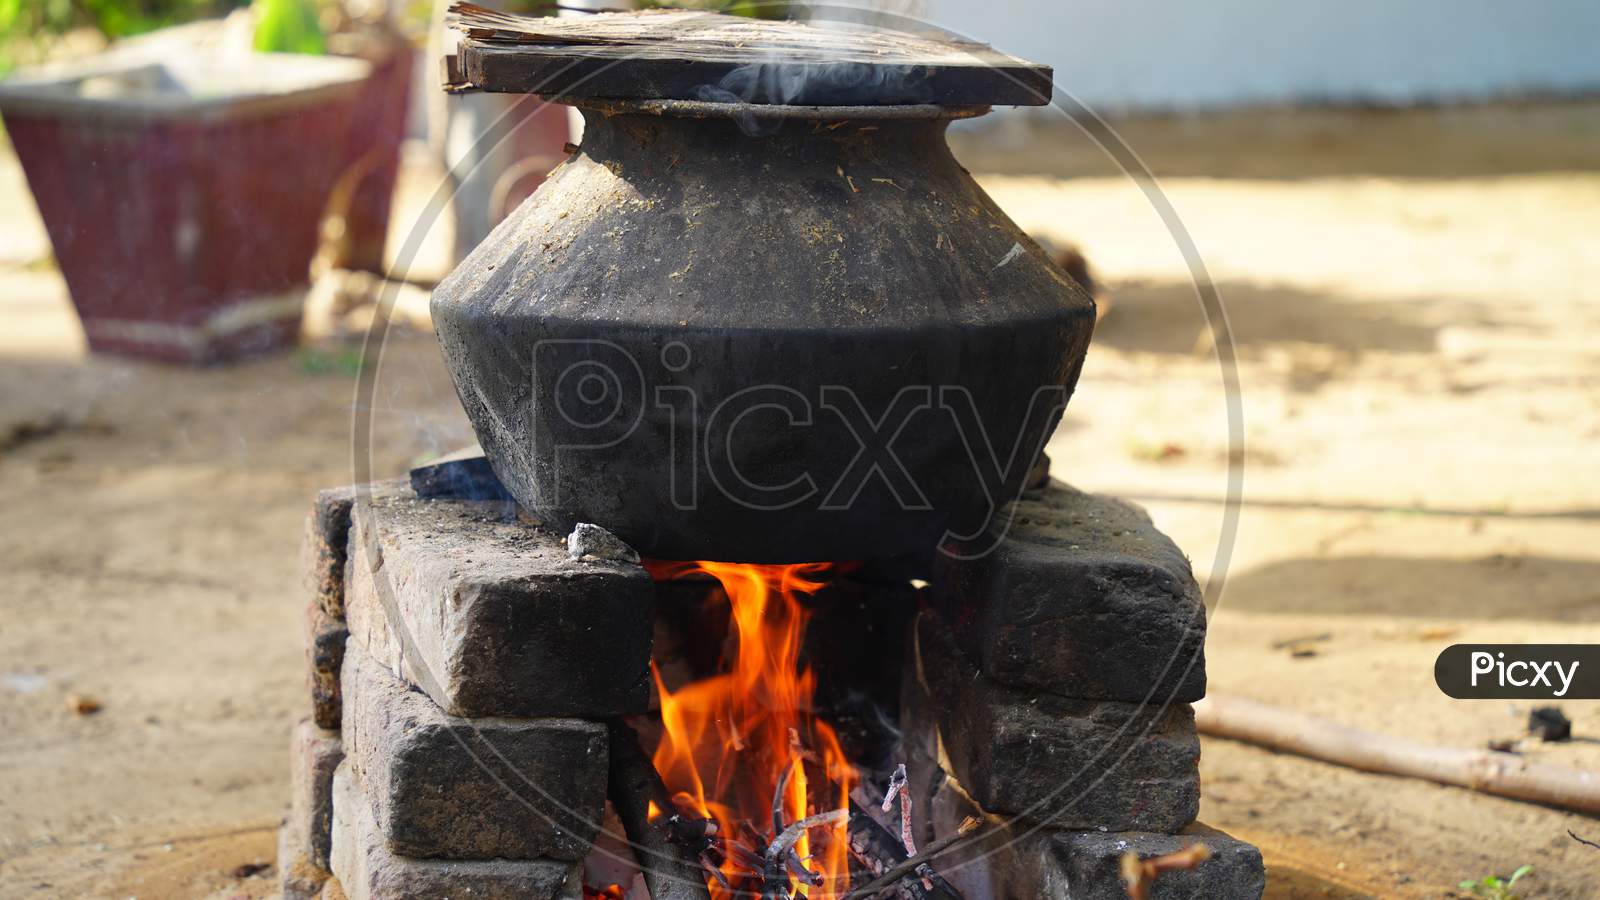 Aluminum Pot On Charcoal Burning Stove, Traditional Indian Charcoal Burning Clay Stove, Isolated On White Background With Clipping Path.